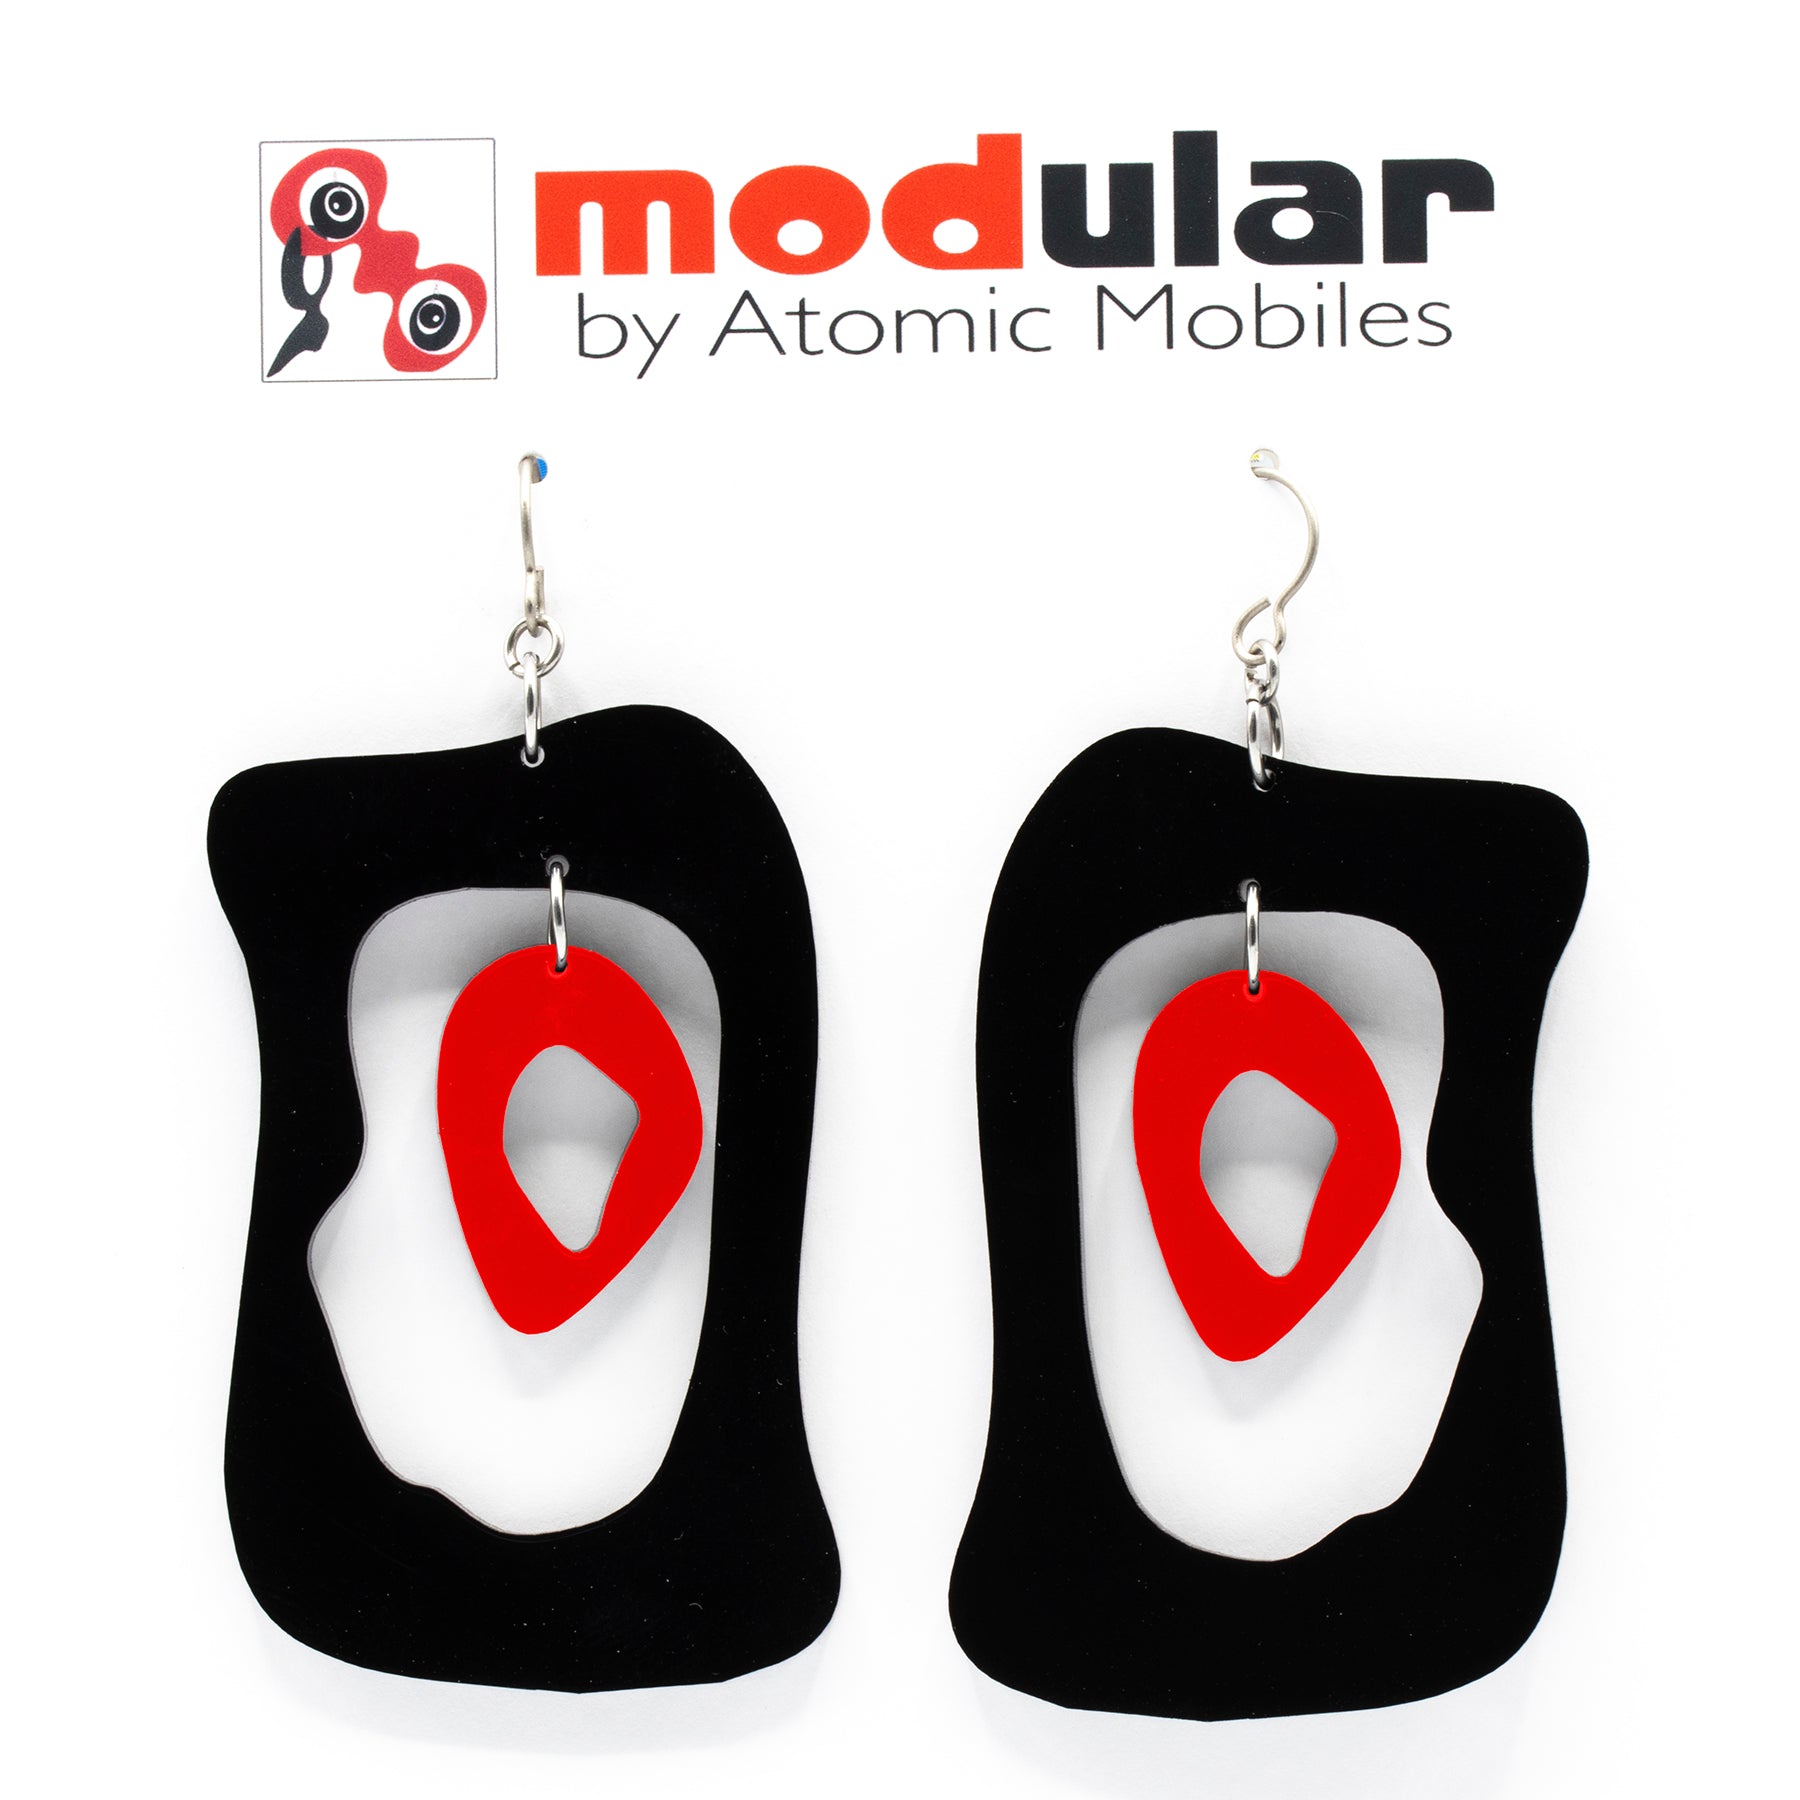 MODular Earrings - Modern Bliss Statement Earrings in Black and Red by AtomicMobiles.com - retro era inspired mod handmade jewelry